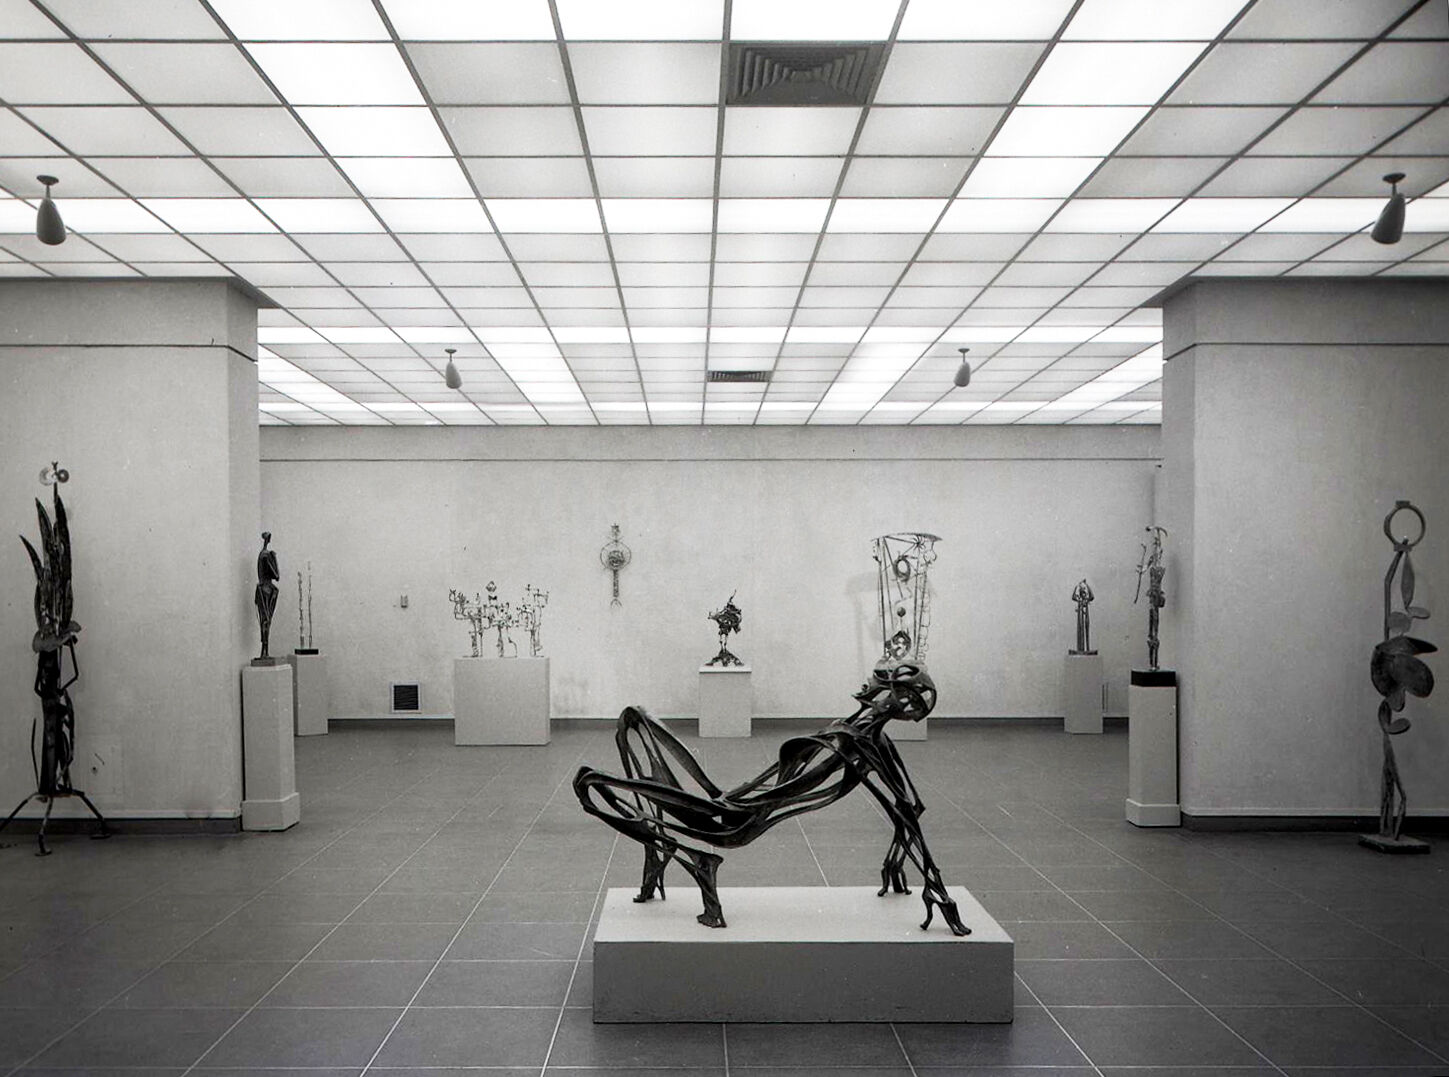 Black-and-white photograph of gallery of sculptures, with a central sculpture of a human figure in the foreground.